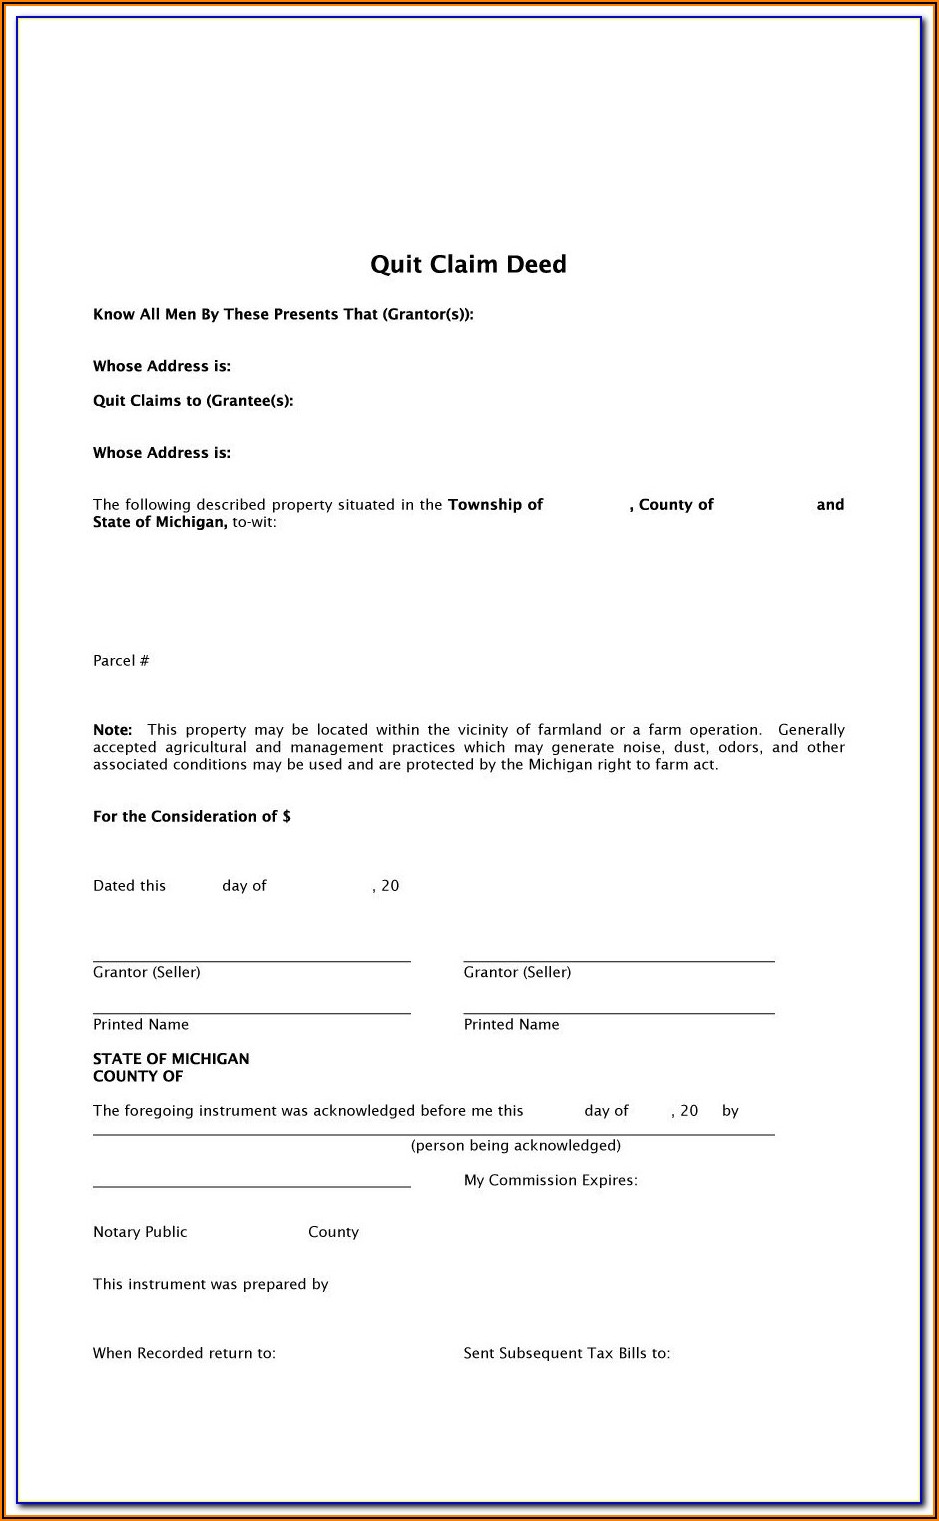 Quit Claim Deed Form Florida Free Download